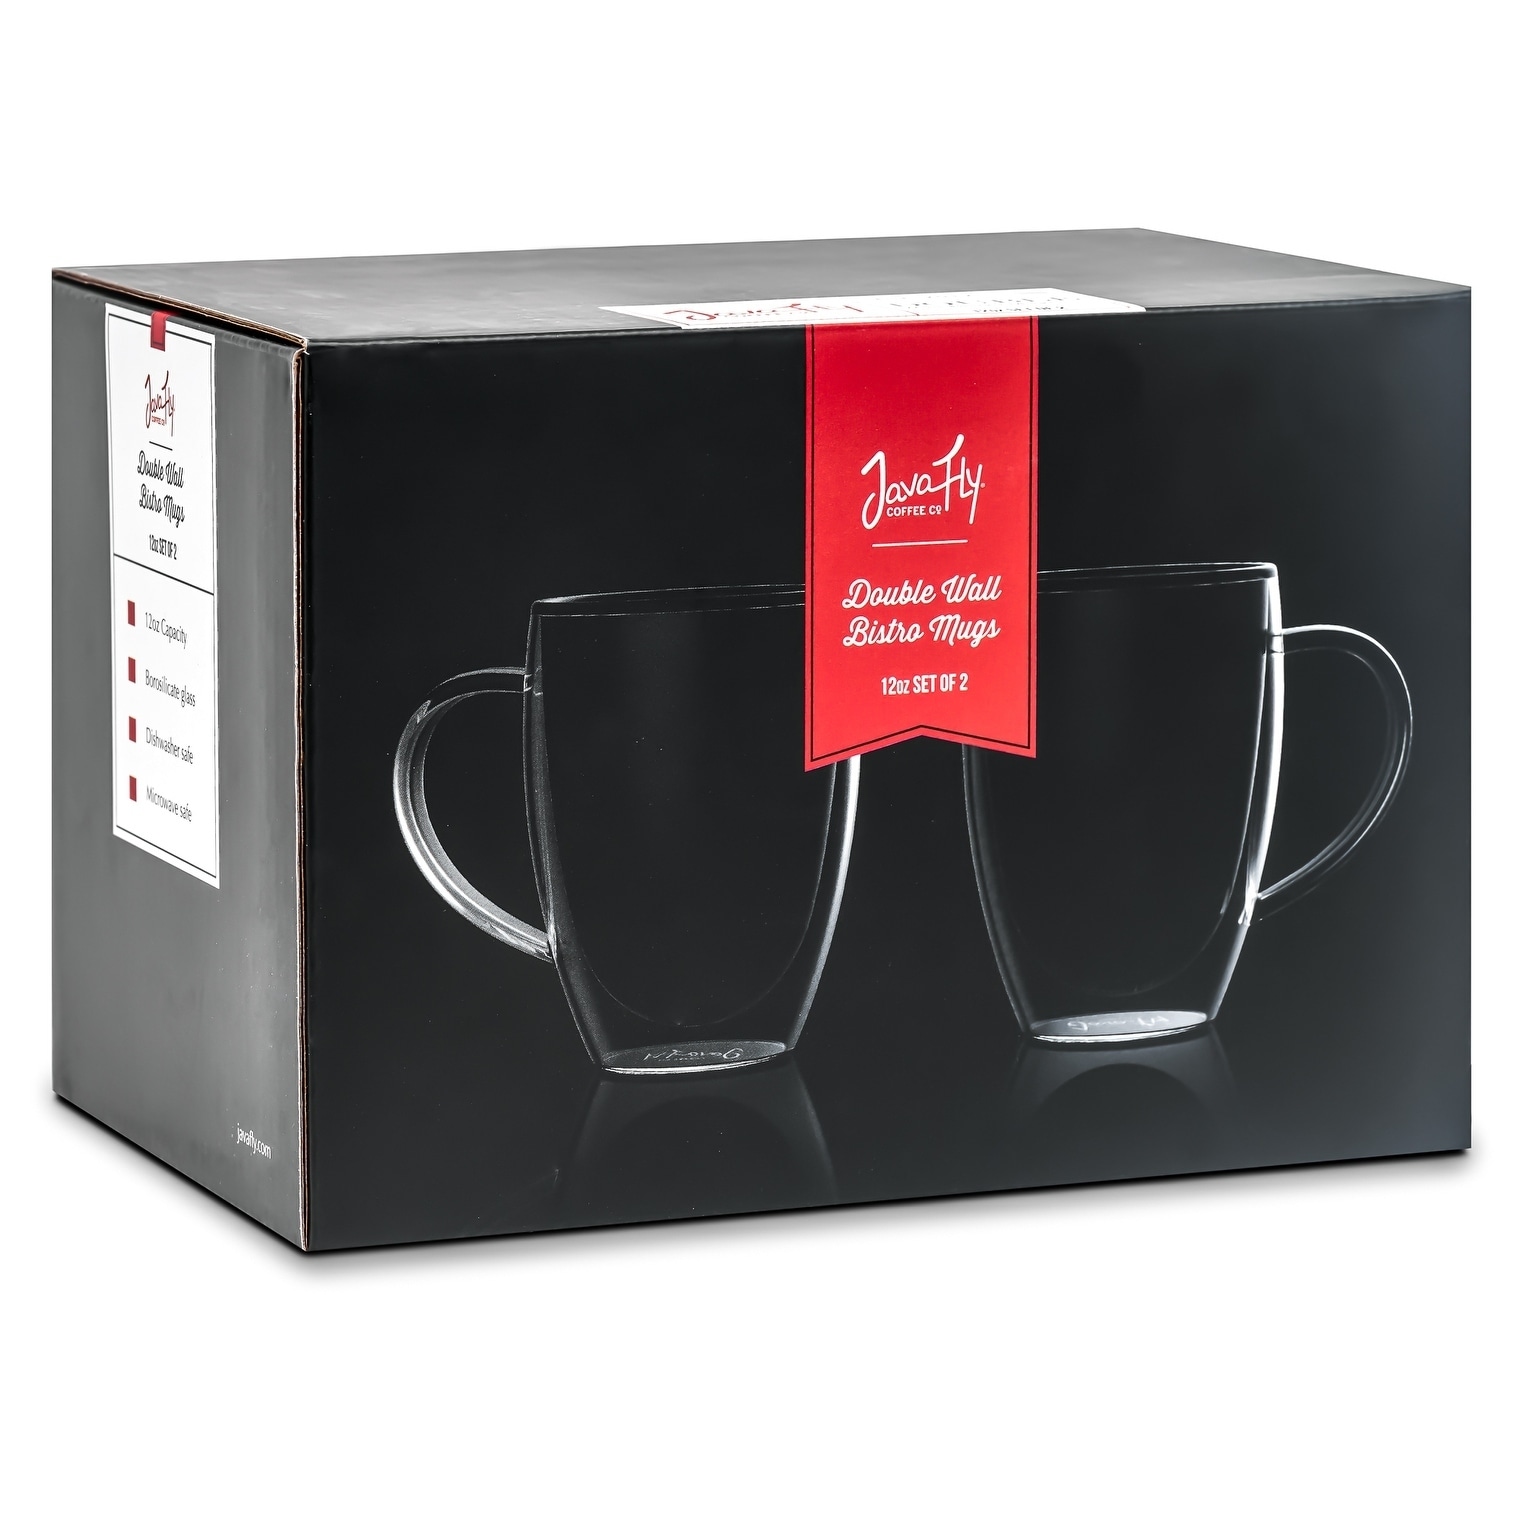 Milk Frother and Set of 12 12oz Bistro Mugs from JavaFly, Double